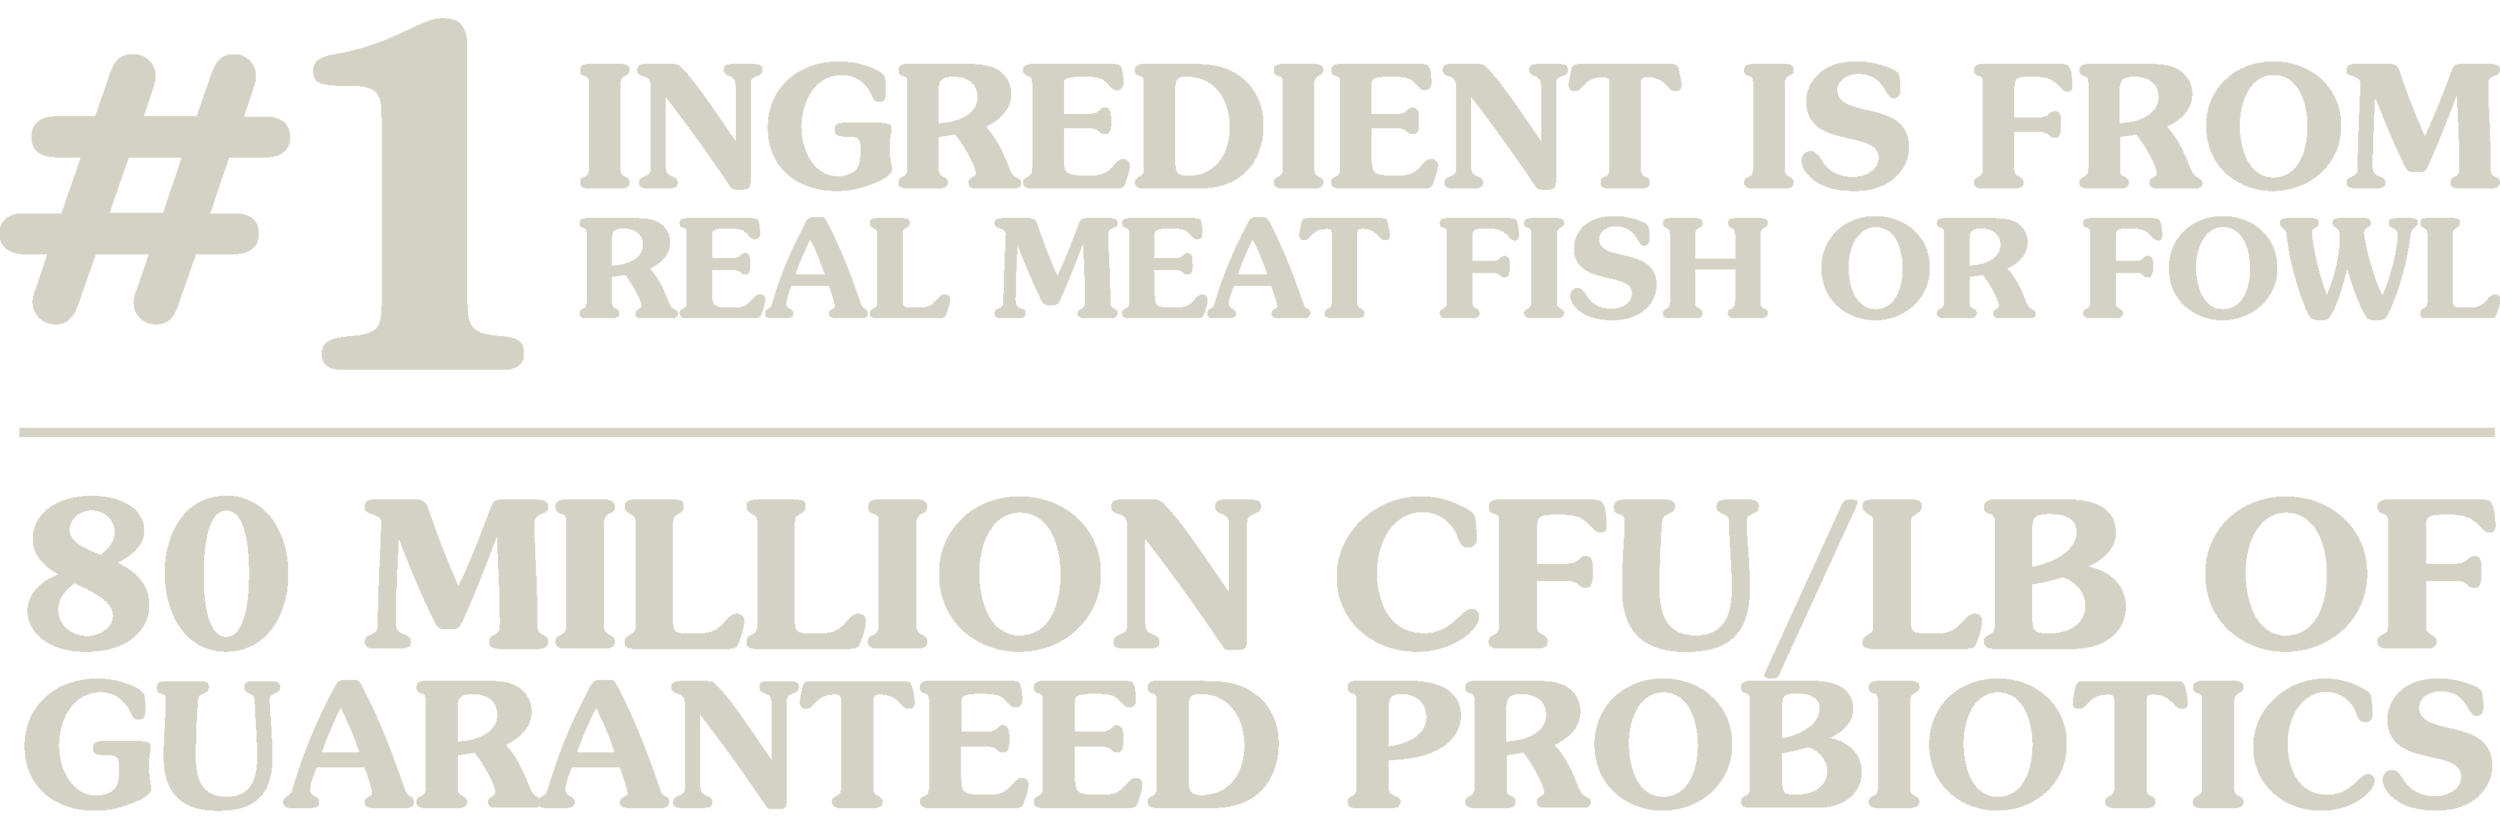 TOW Ingredient Banner - NO Grain-Free.png